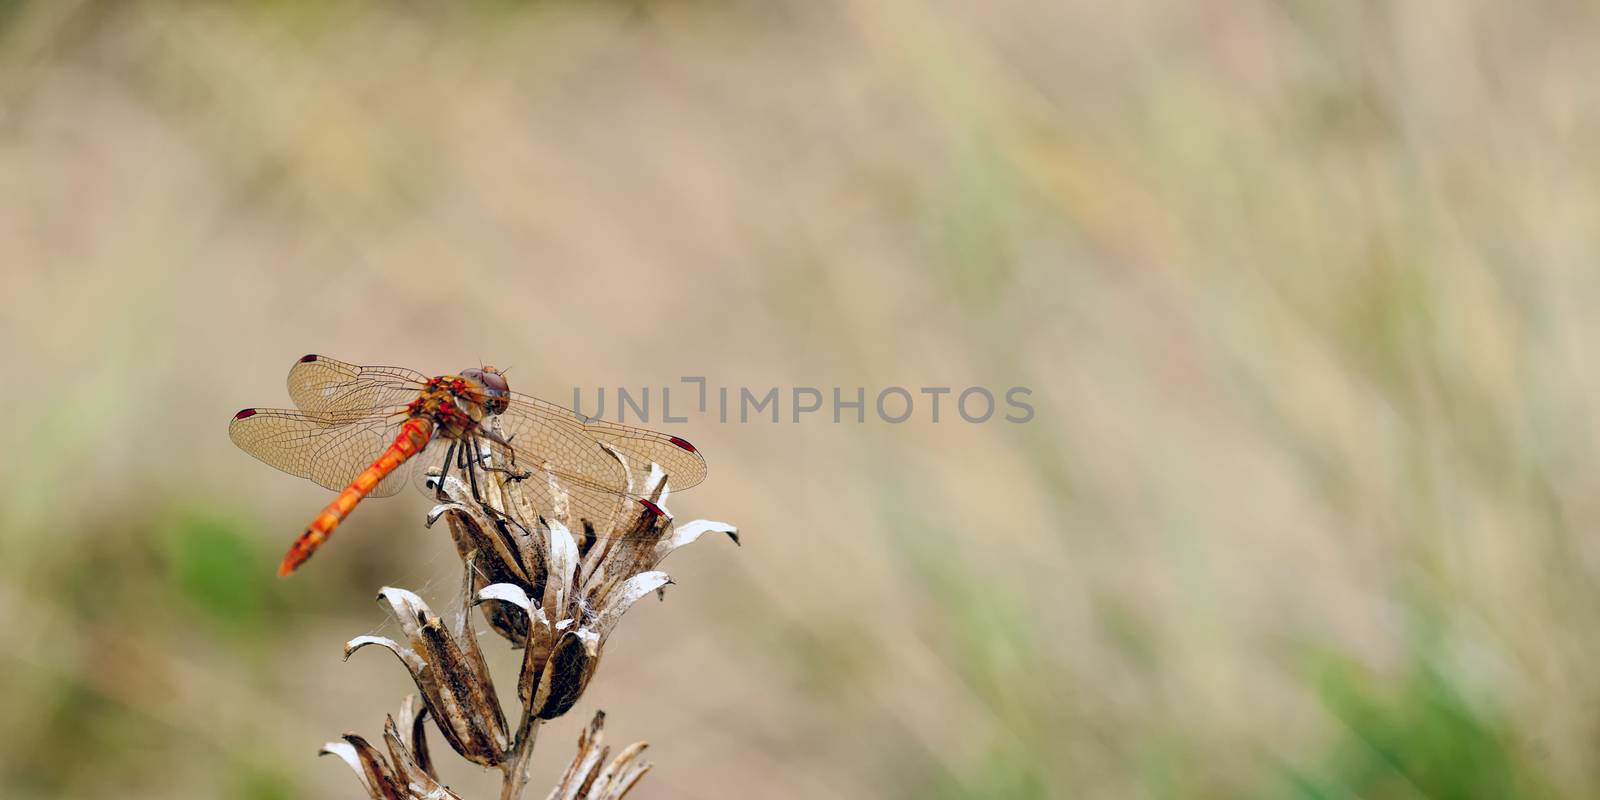 A common darter dragonfly (Sympetrum striolatum) resting on some dead vegetation whilst on the look out for prey and guarding his territory.